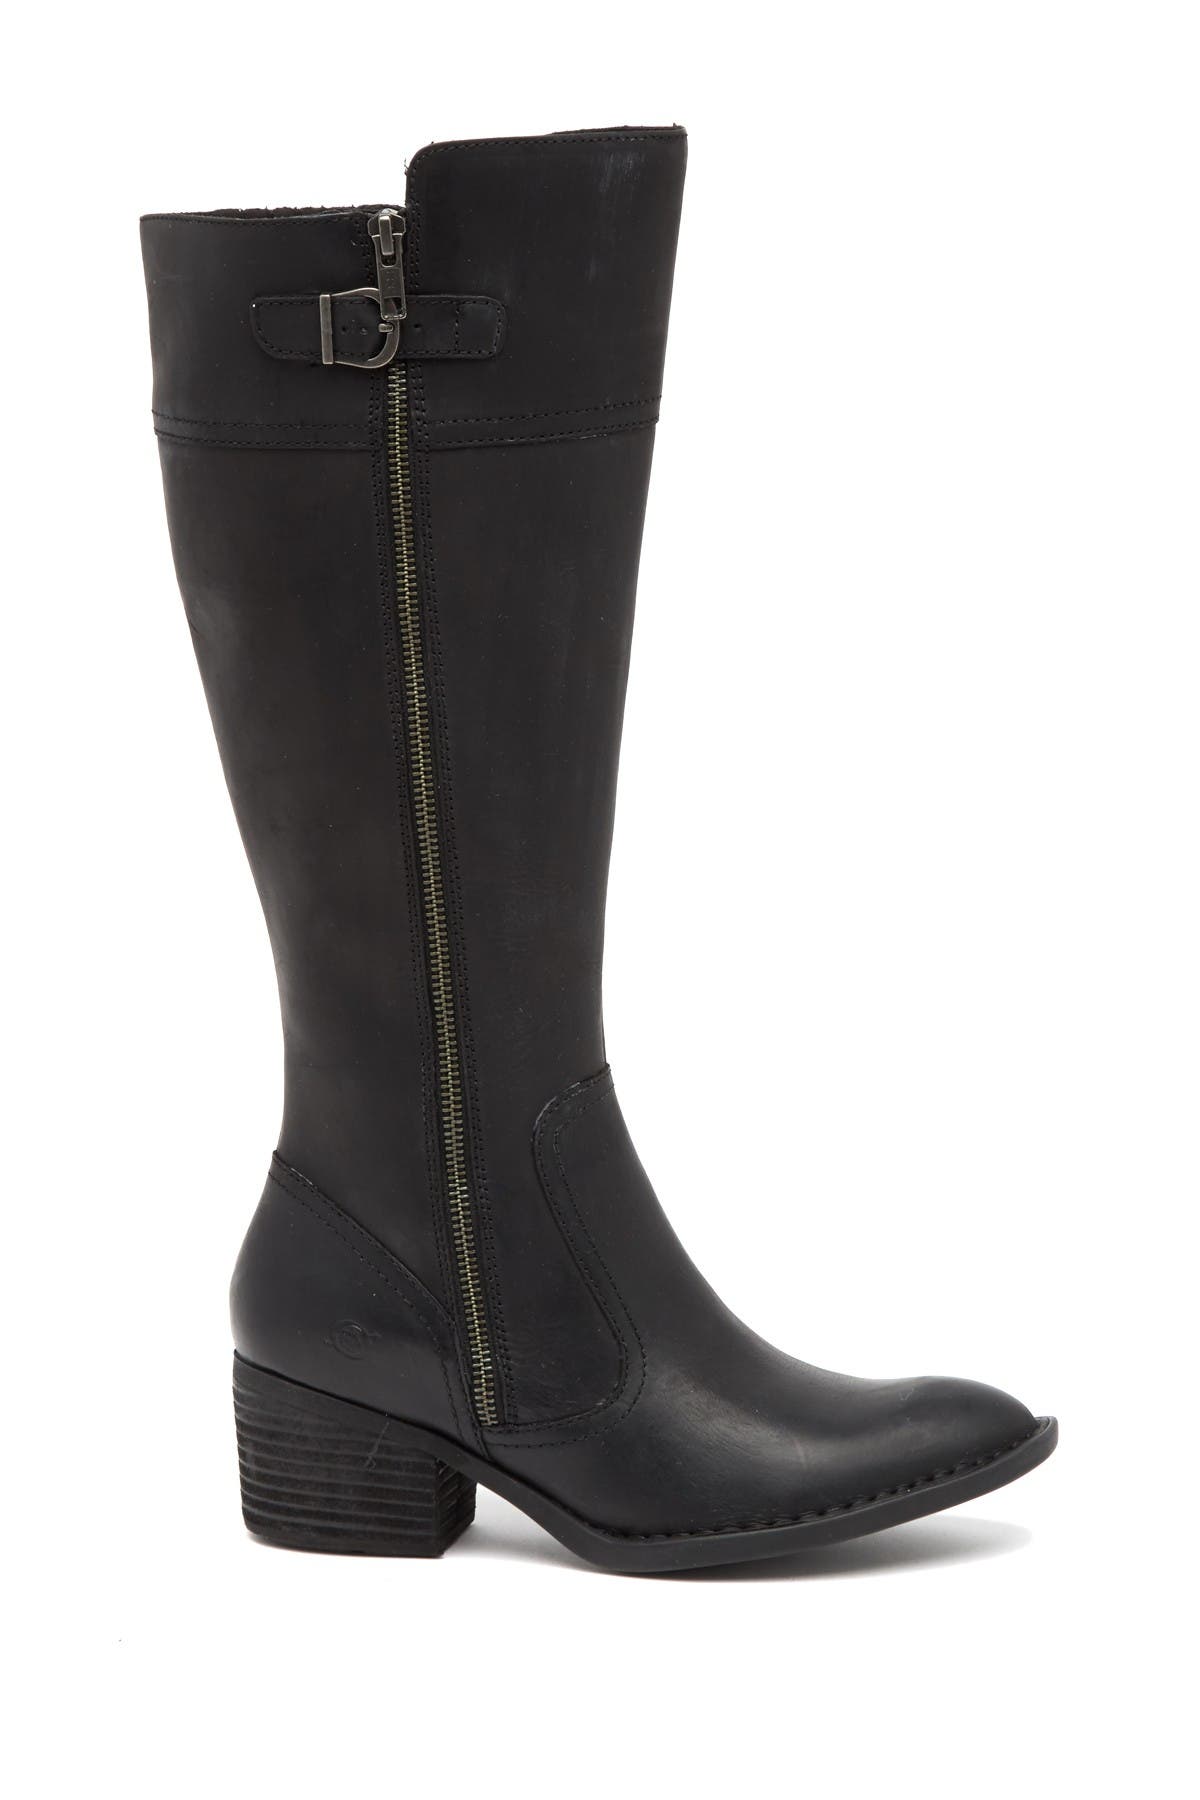 Fannar Wide Calf Leather Knee High Boot 